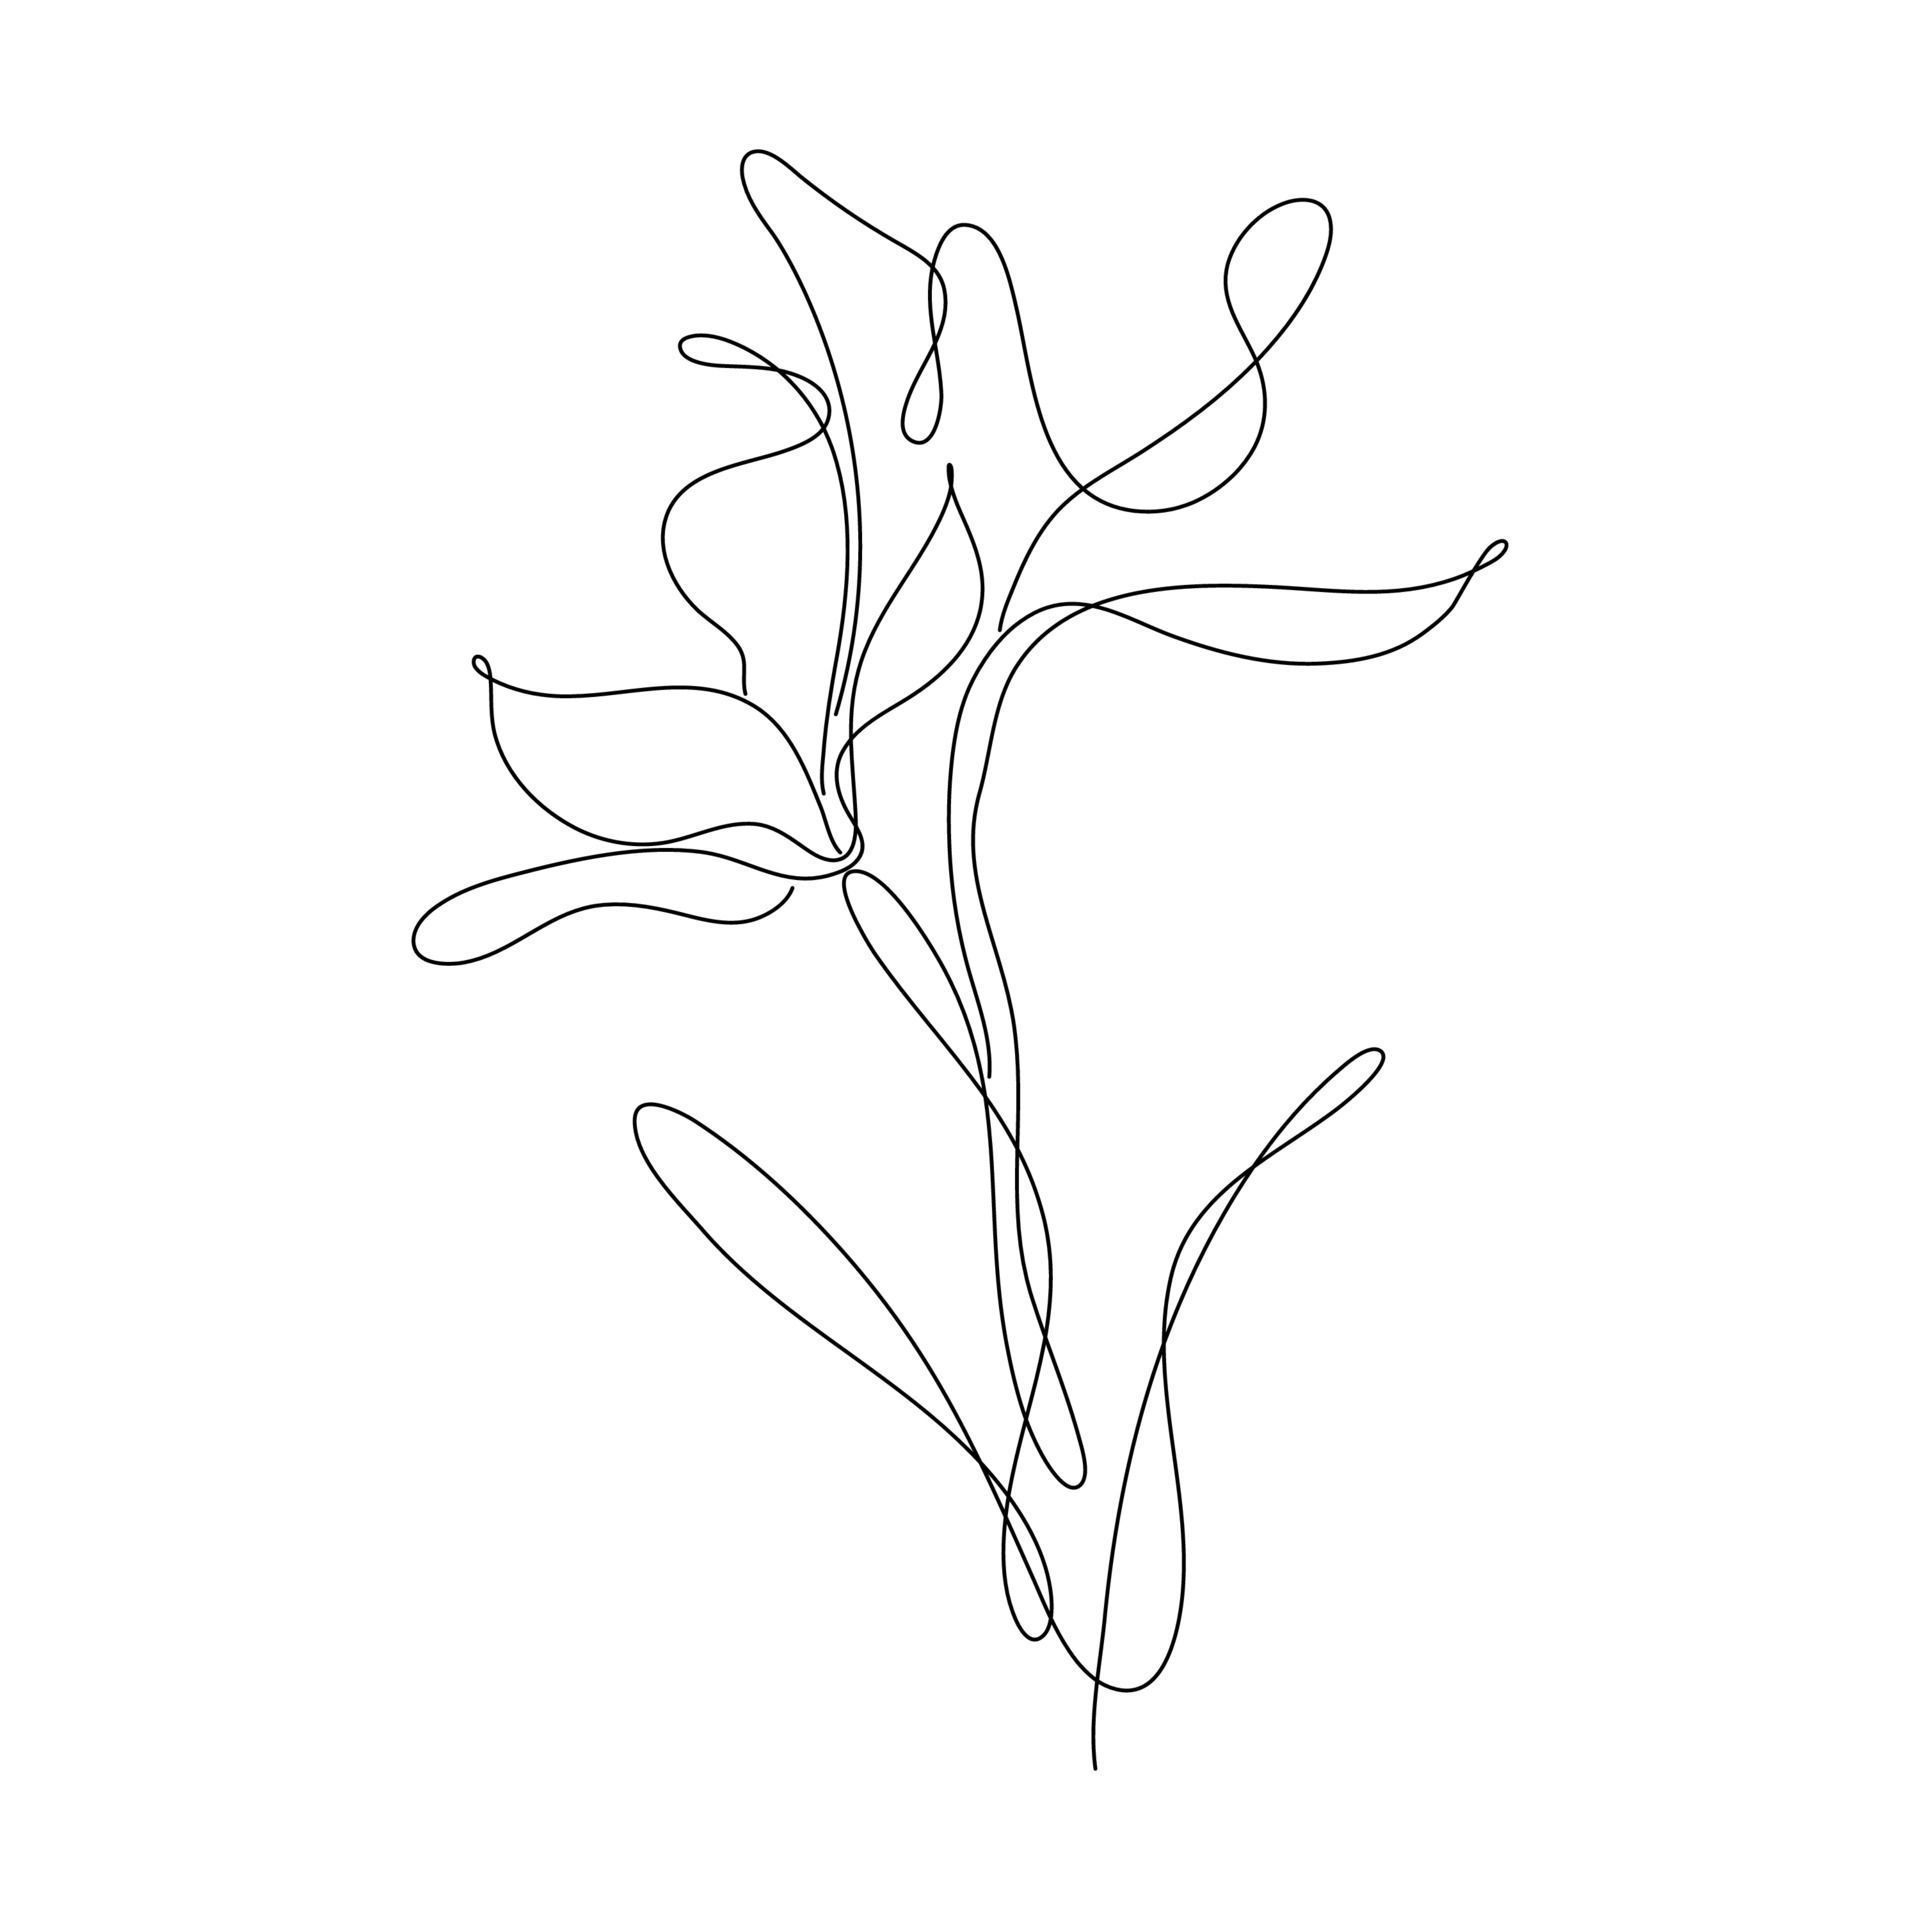 A drawing of a flower - Border